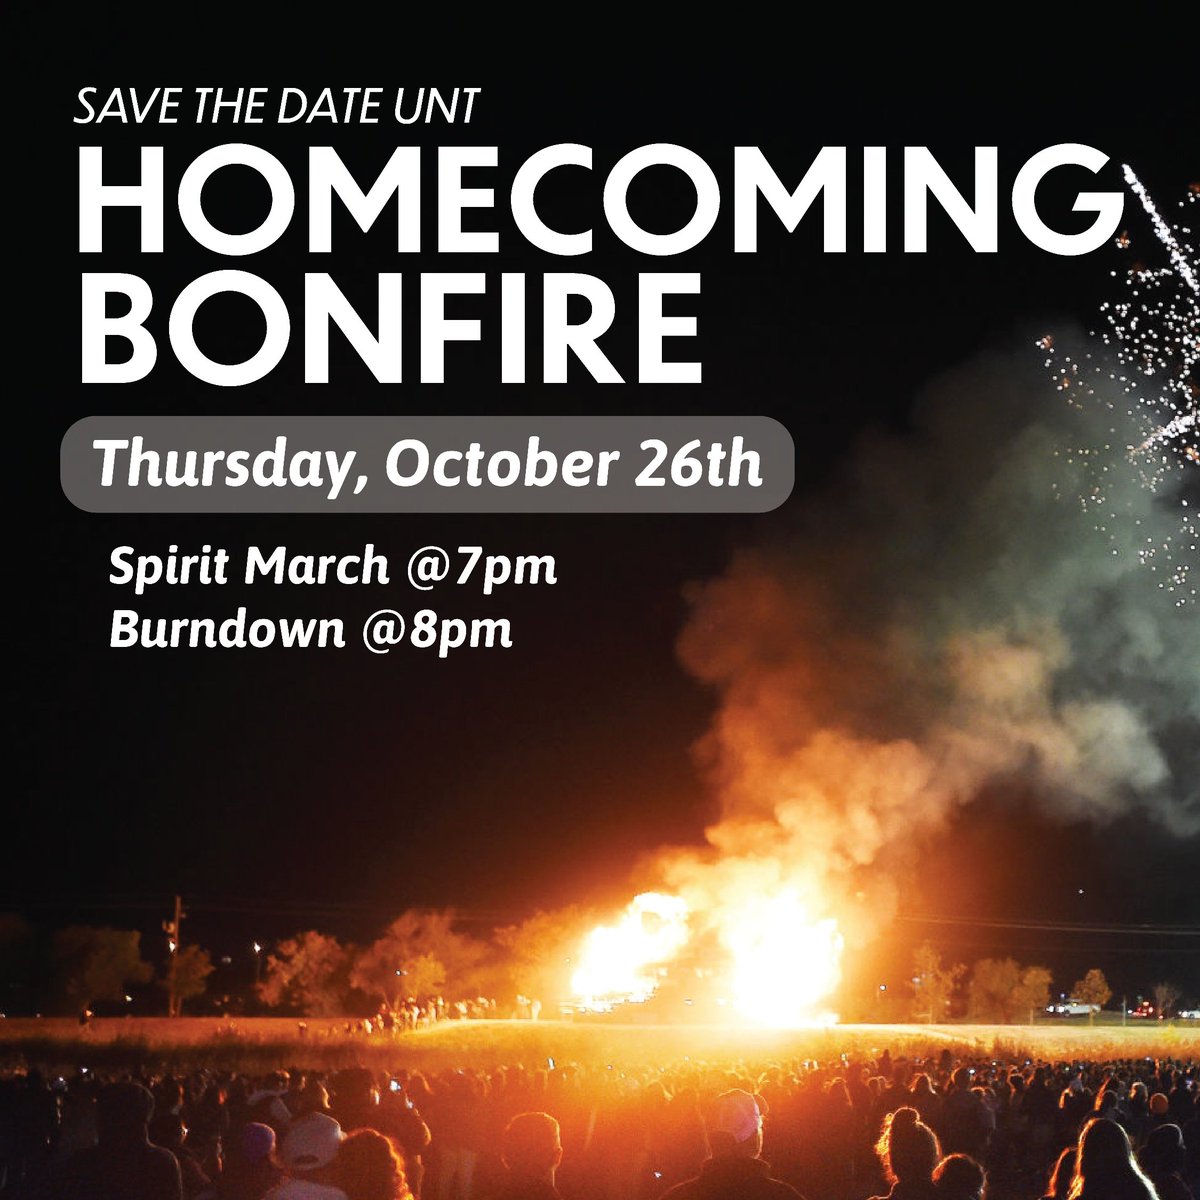 The 2023 UNT Homecoming Bonfire date is Thursday, October 26th. Burndown will be at 8:00pm. See you there to celebrate this yearly tradition since 1935! Repost! #untbonfire23 @UNTHomecoming @UNTsocial @MeanGreenFB @MeanGreenSports @NTScrappy #unt #gmg #unttraditions